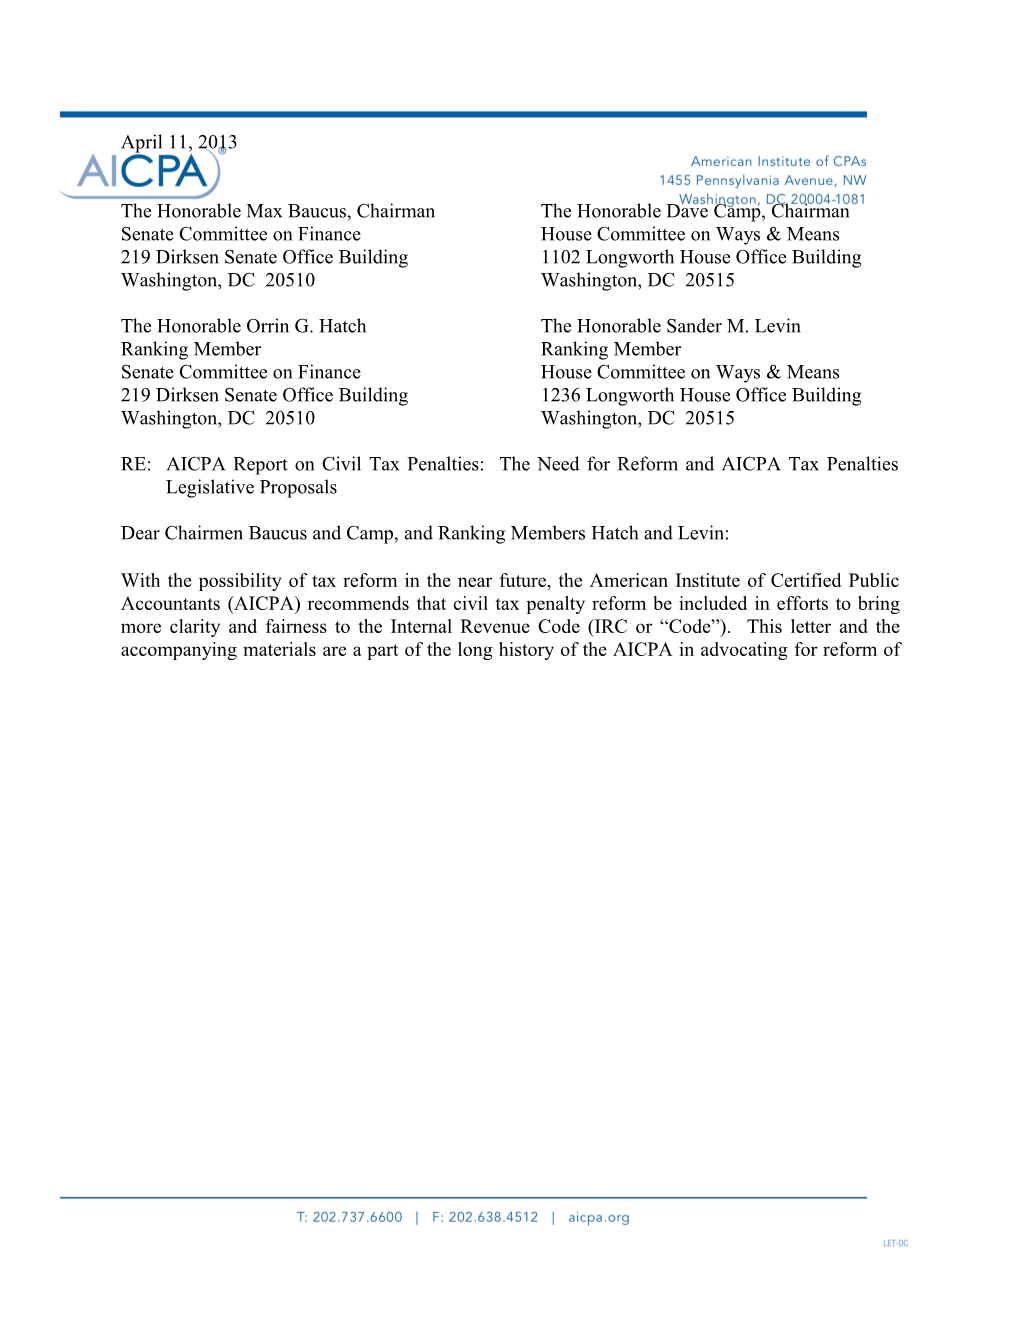 AICPA Cover Letter on Civil Tax Penalties Report and Legislative Proposal Submission